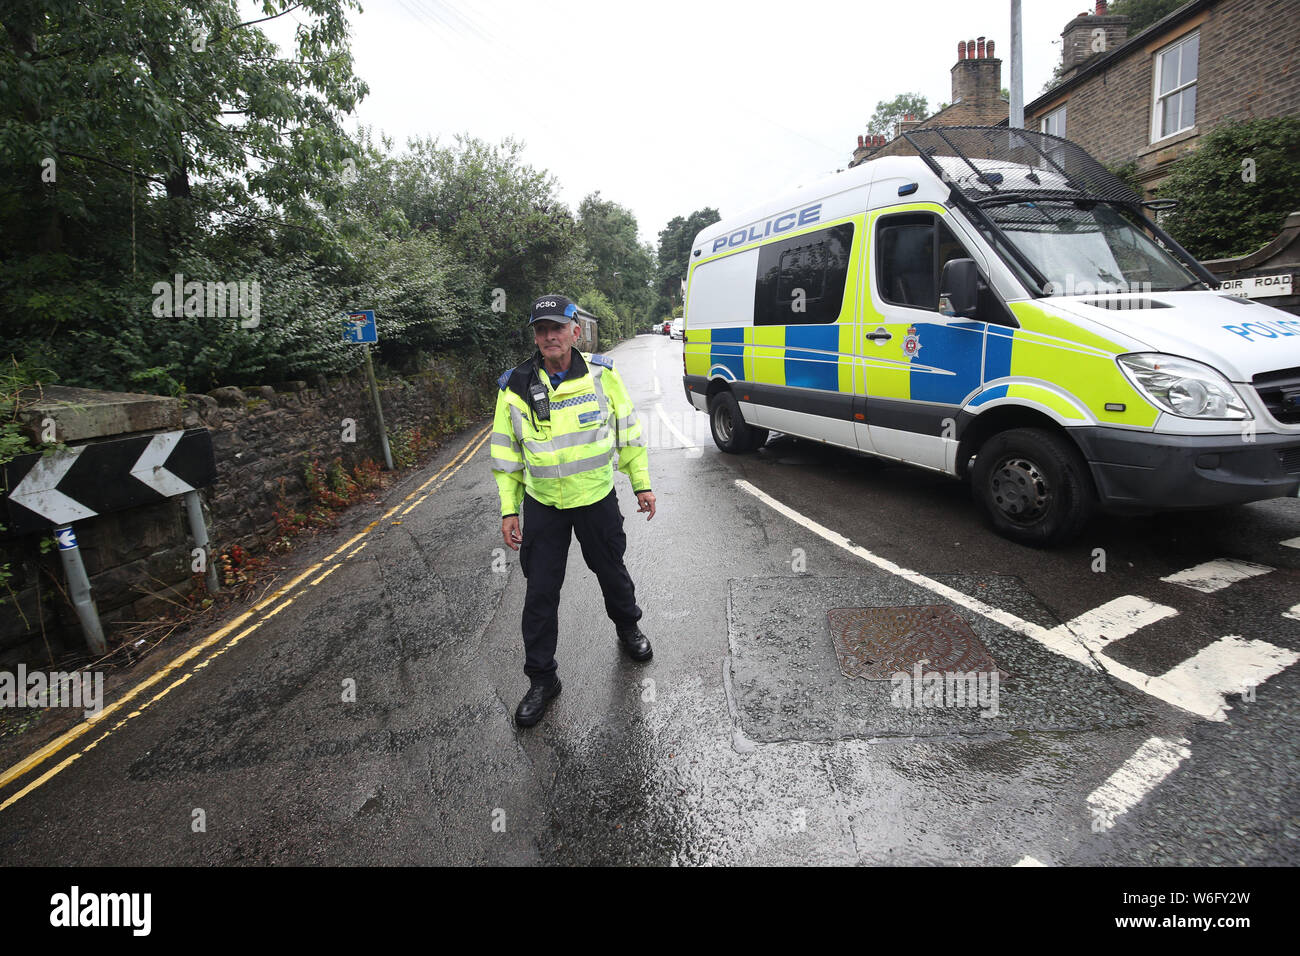 RETRANSMITTING CORRECTING CHESHIRE TO DERBYSHIRE CORRECT CAPTION BELOW A policeman blocks the road leading to Toddbrook Reservoir near the village of Whaley Bridge, Derbyshire, after a wall around it was damaged in heavy rainfall. Stock Photo